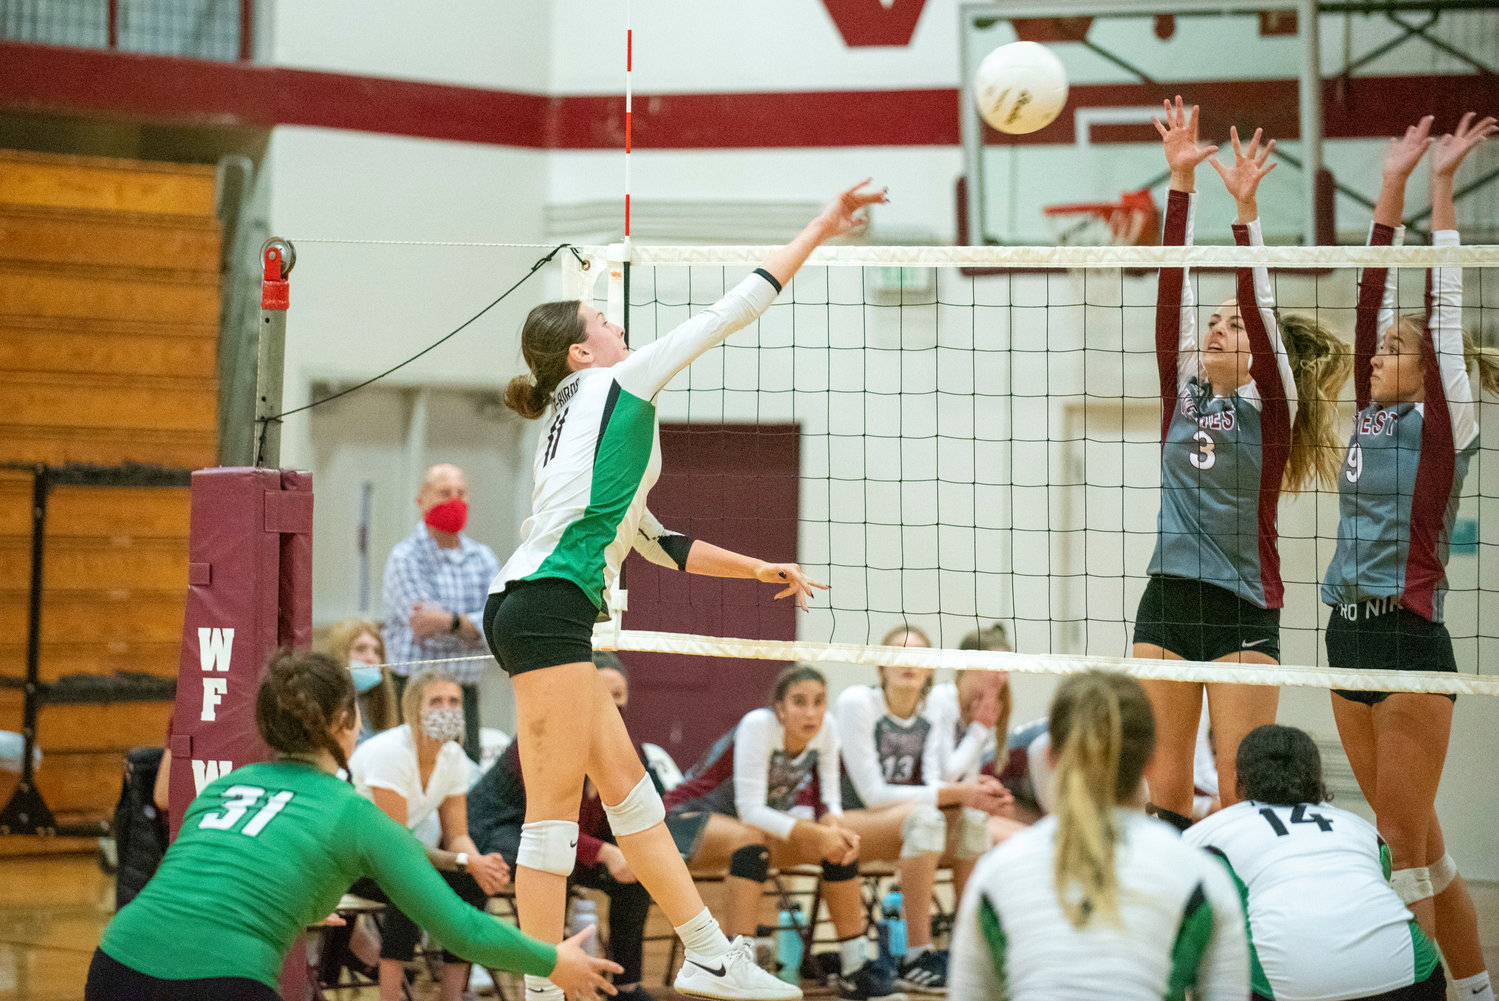 Tumwater's Kira Turcotte (11) throws down a spike against W.F. West's Amelia Etue (3) and Ava Olsen (9) on Oct. 14, 2021.